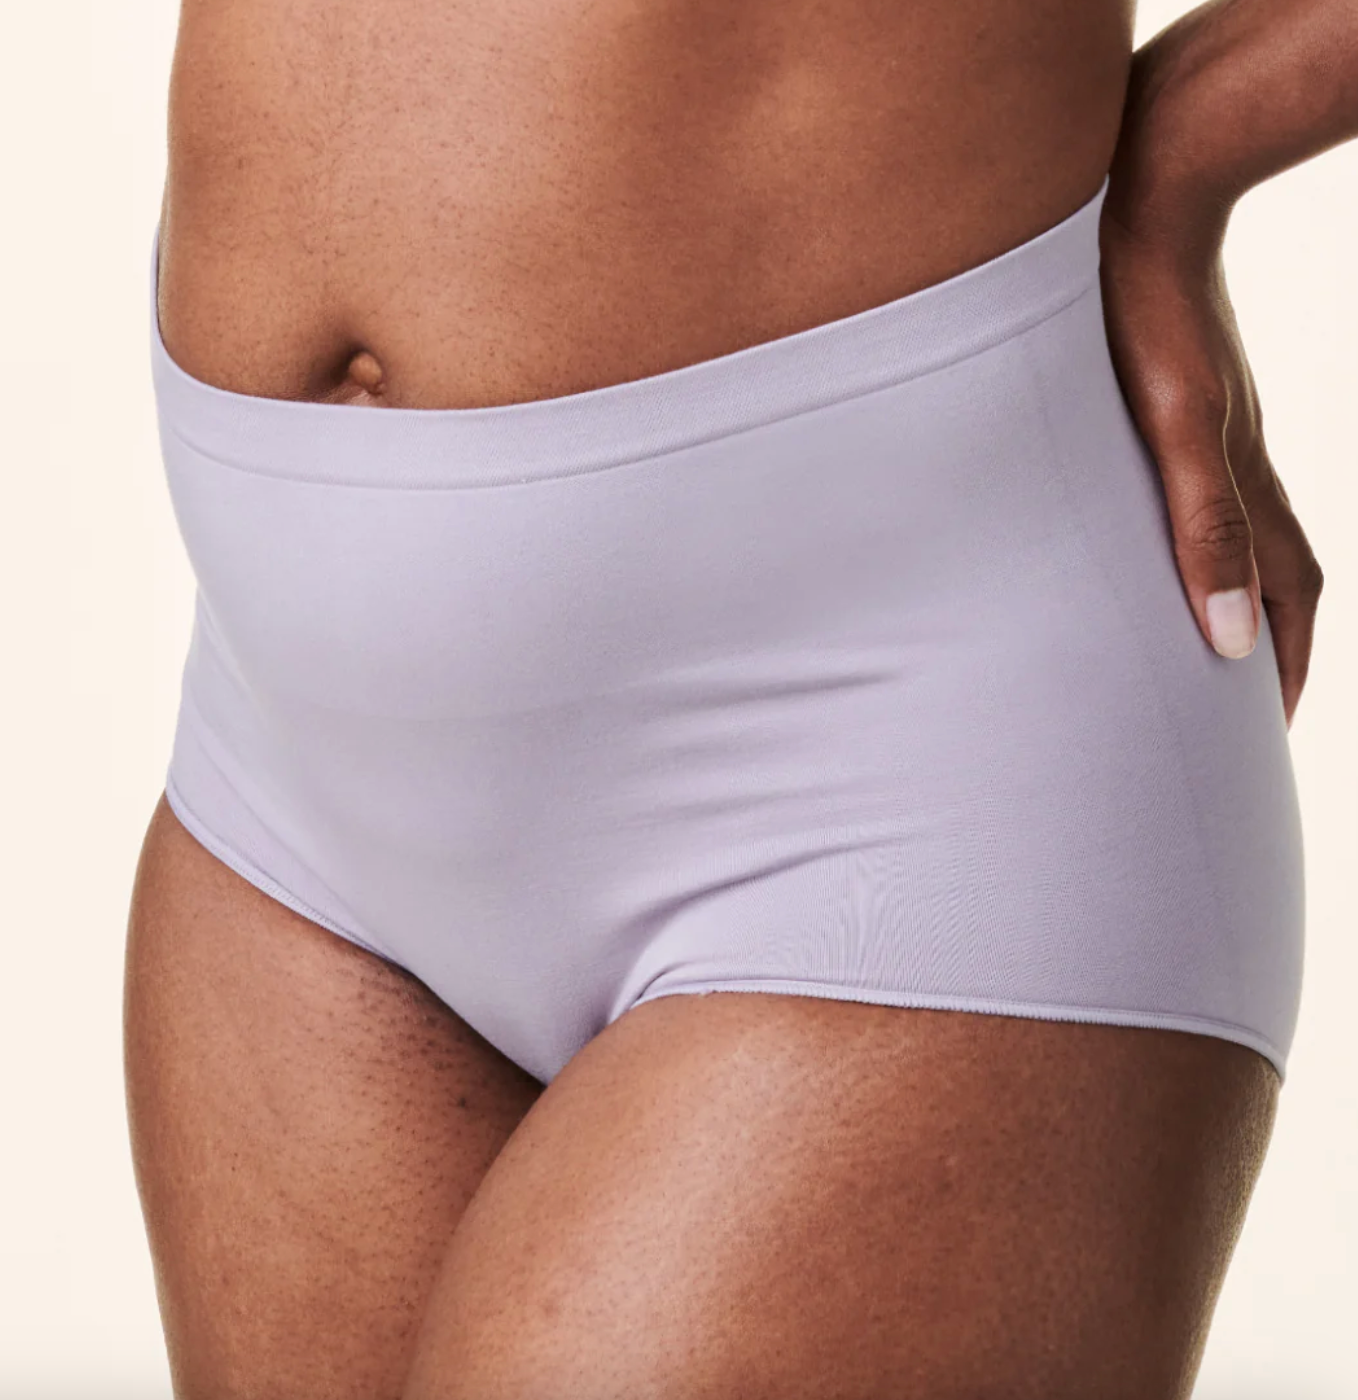 High Rise Seamless Shorty 21003BA - Grey Orchid